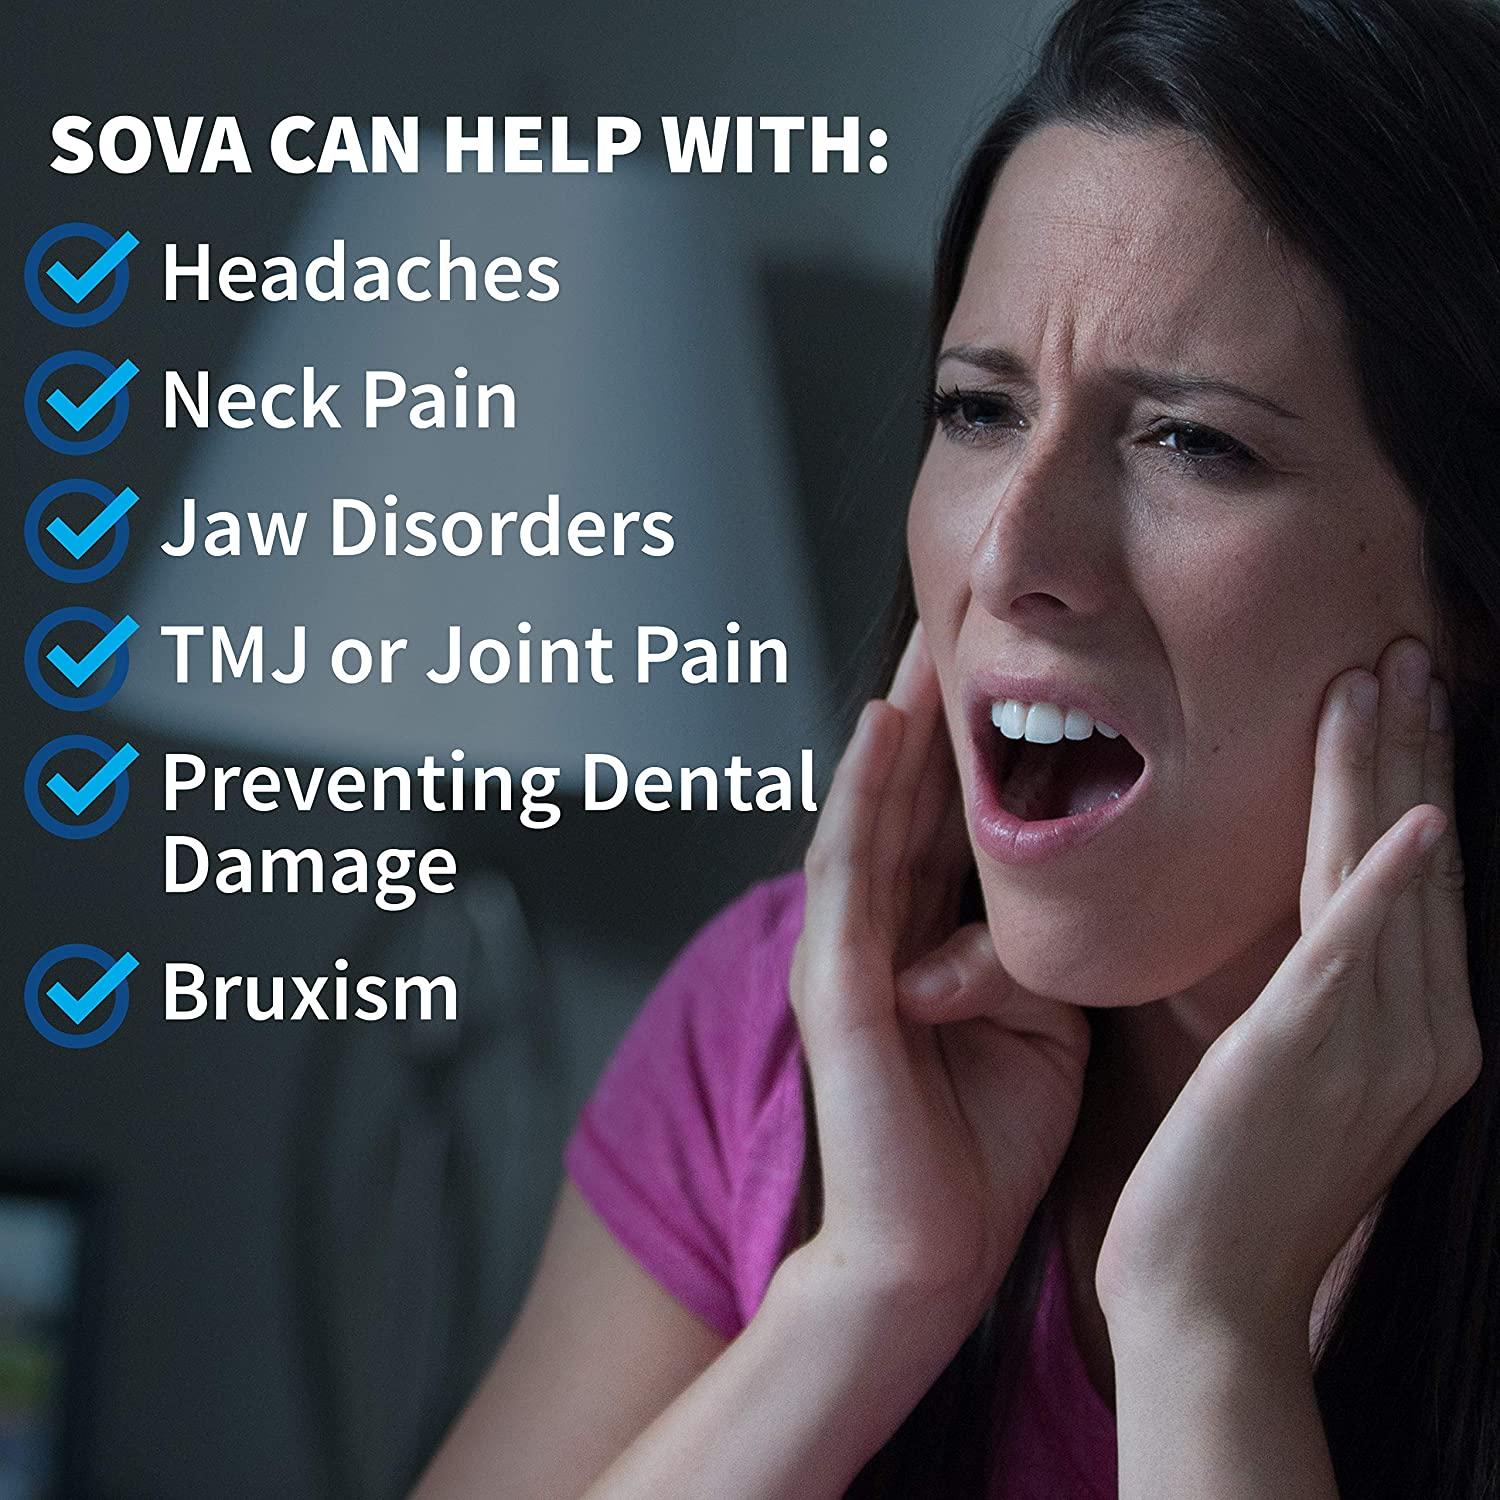 SOVA Night Guard - Those mornings when you wake up fresh and ready